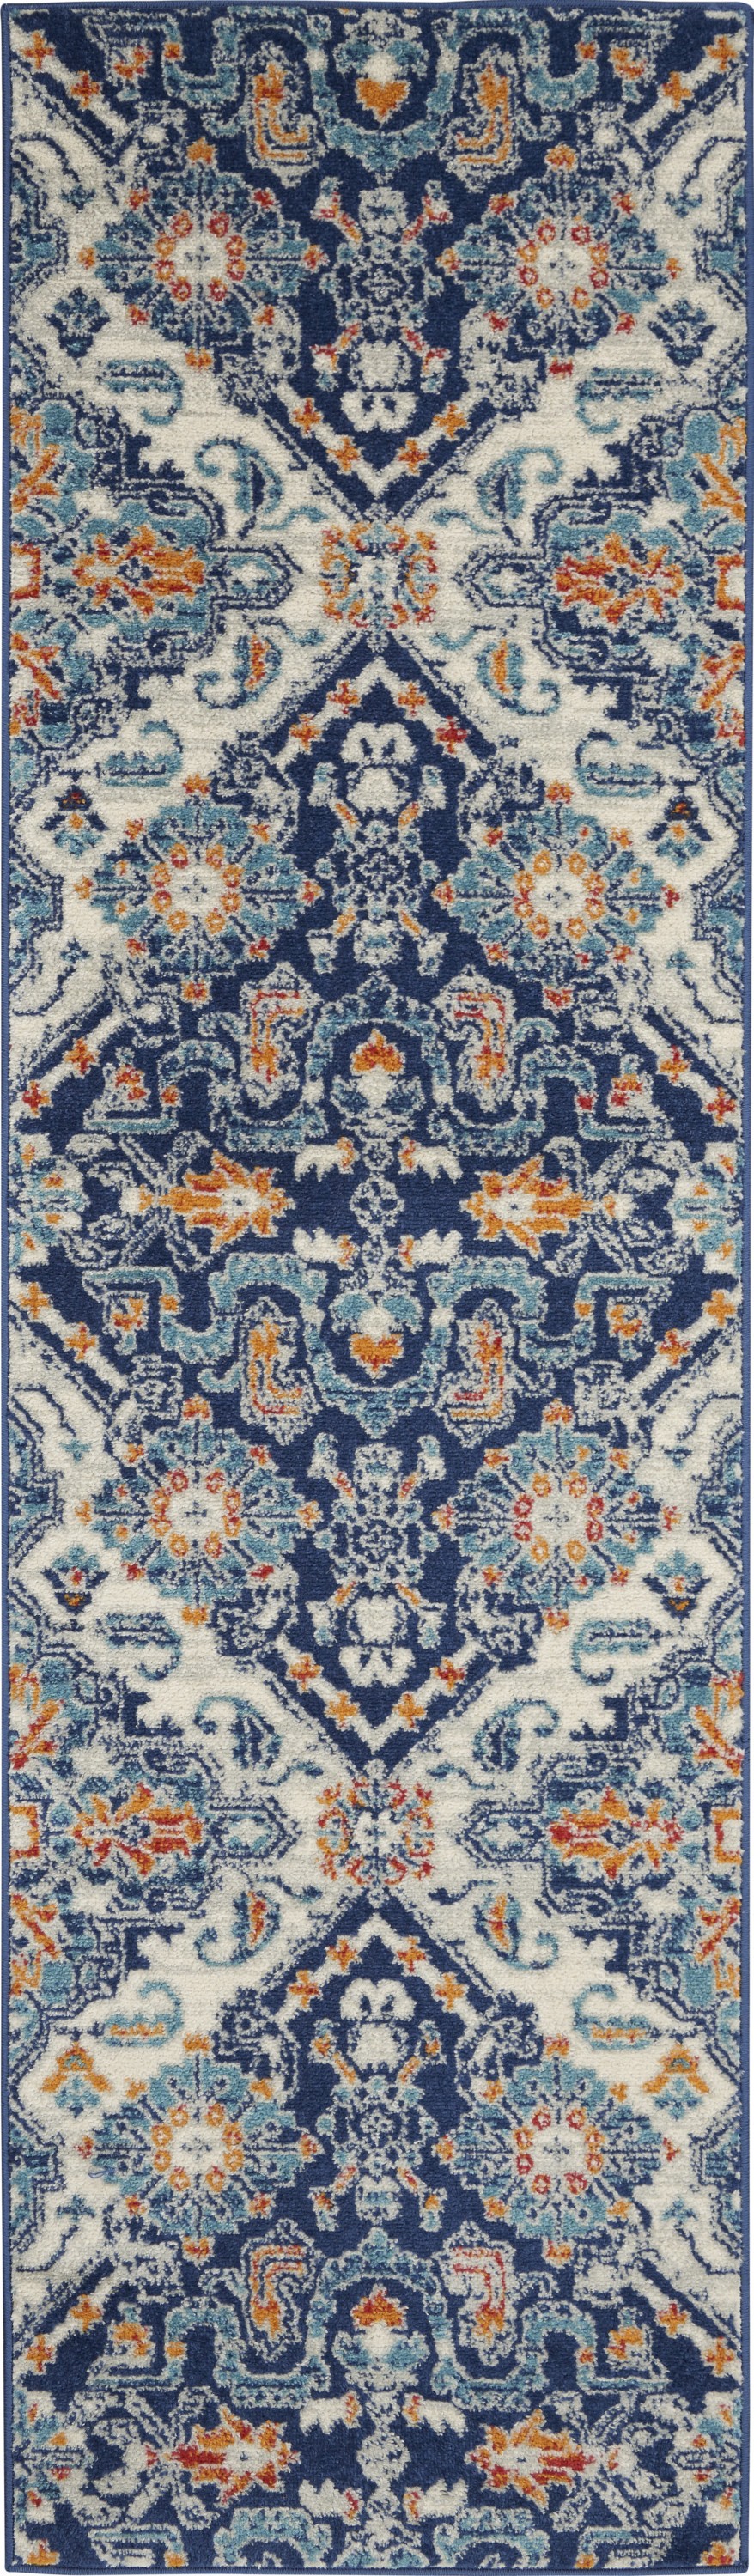 8' Blue And Ivory Floral Power Loom Runner Rug-385629-1